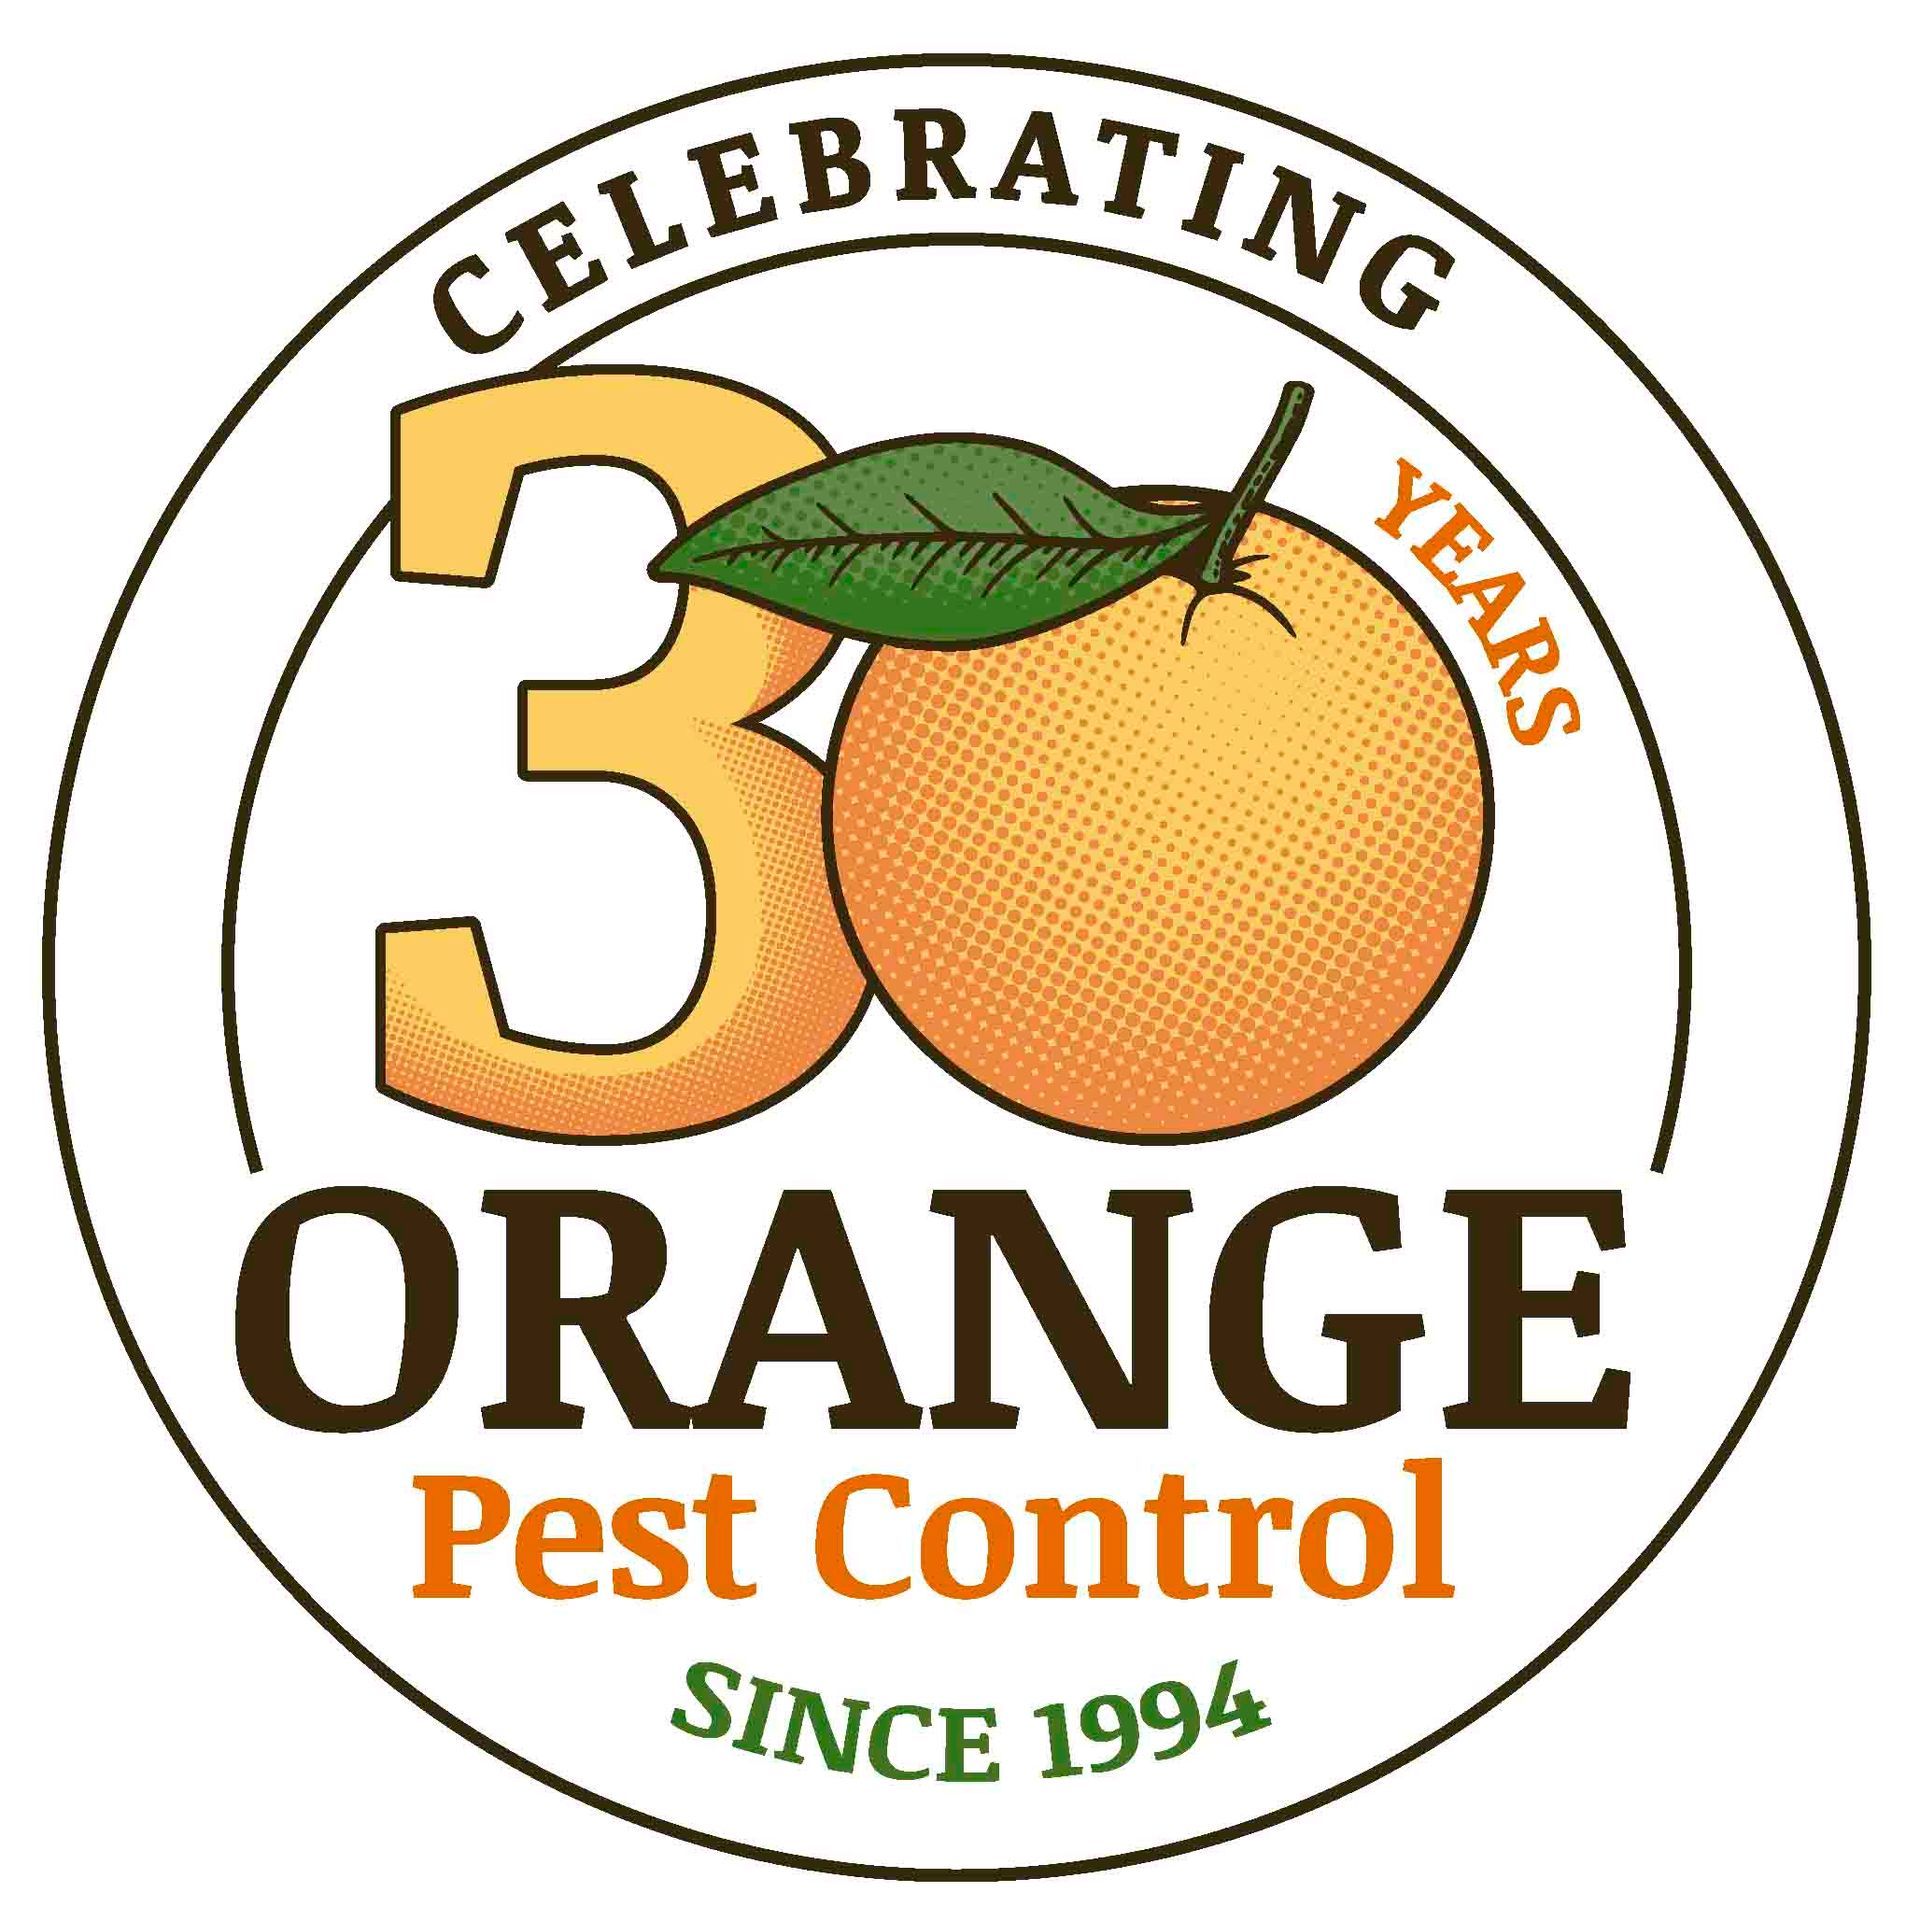 a logo for orange pest control celebrating 30 years since 1994